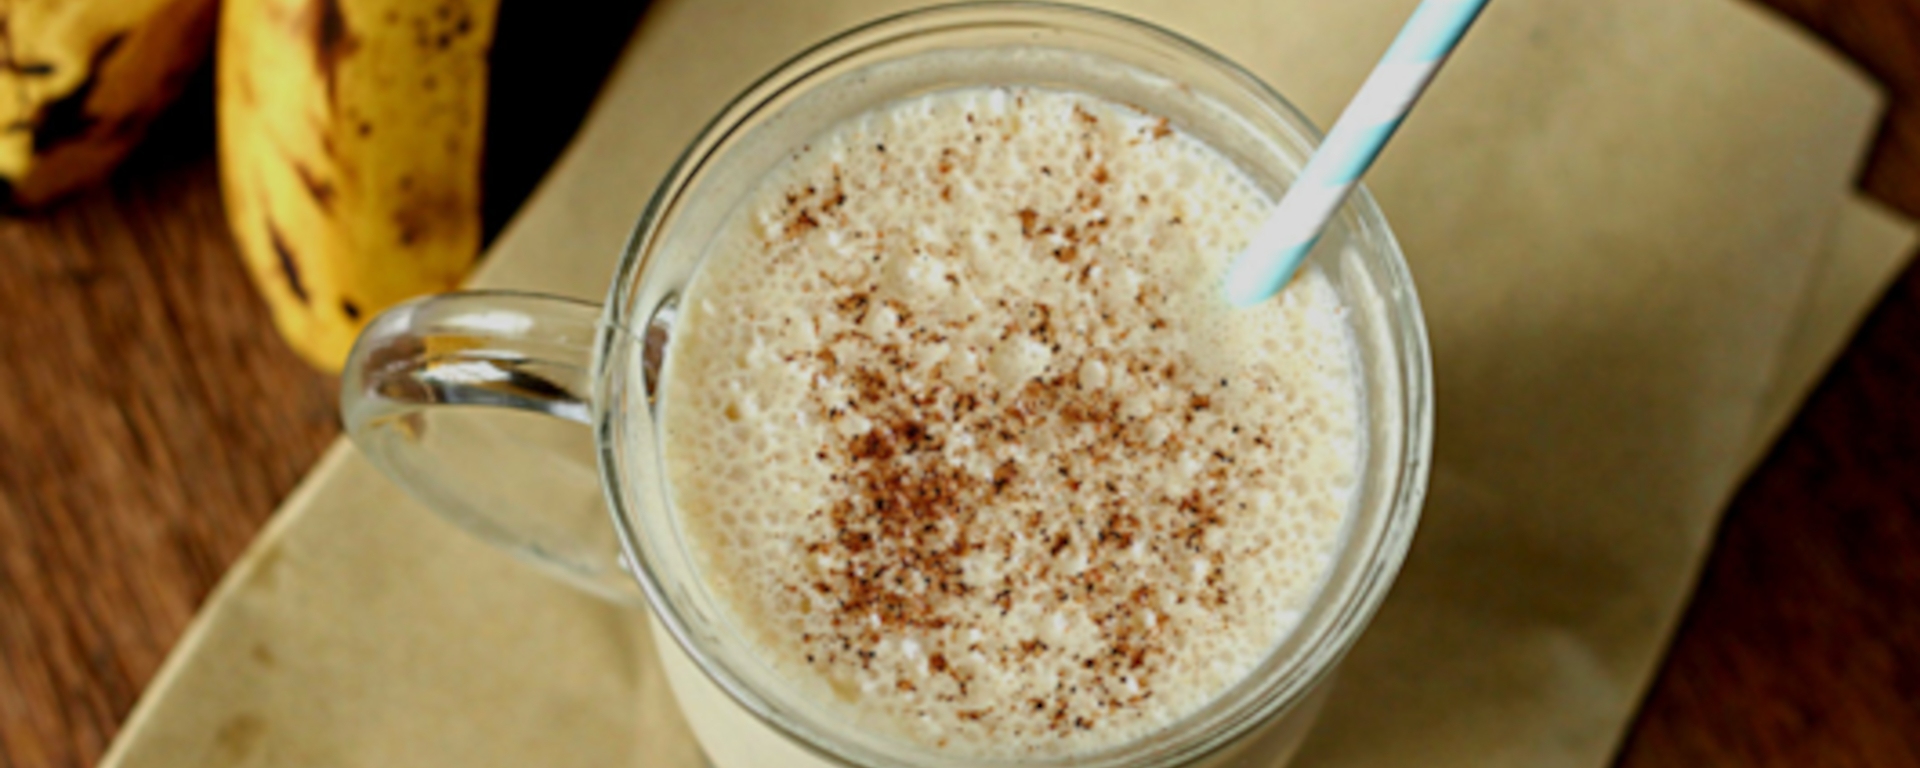 Maca Fertility and Better Sex Smoothie